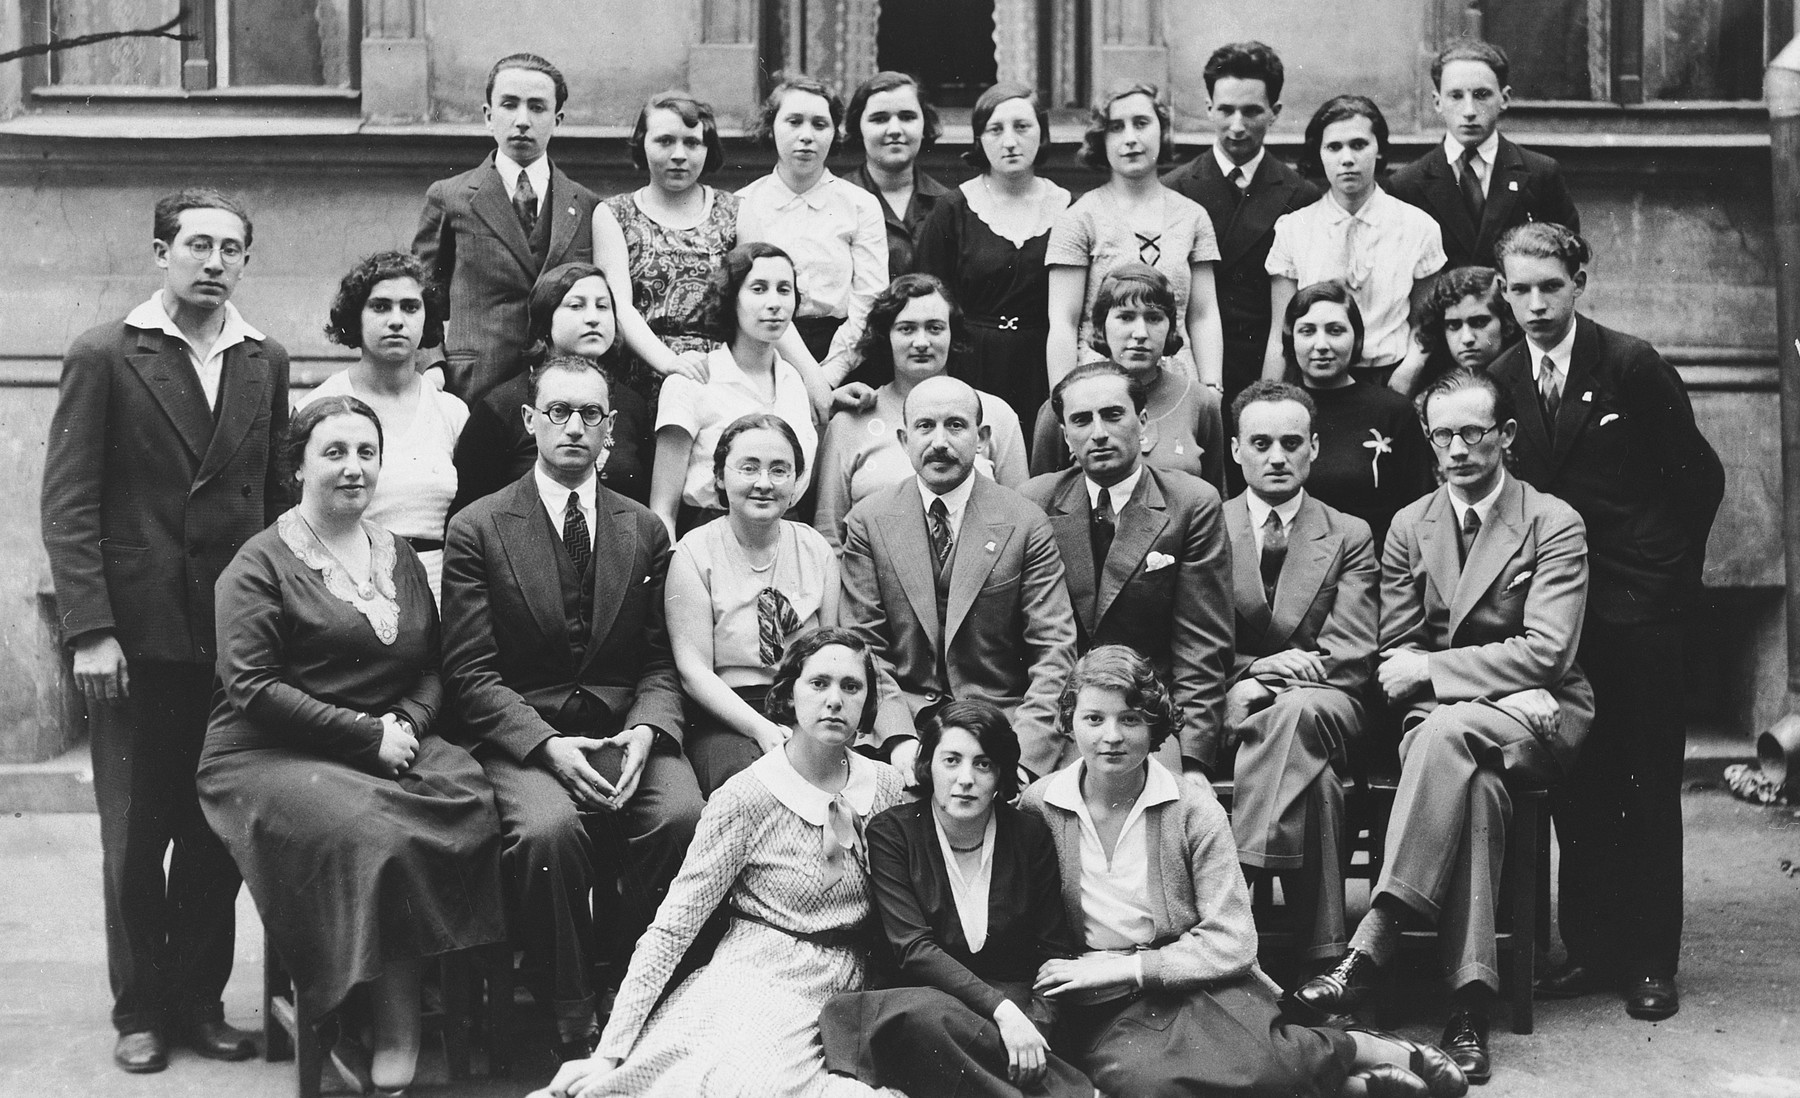 Students and teachers in the Ezra Schule in Riga, Latvia.

Esther Lurie is pictured in the third row, second from the left.